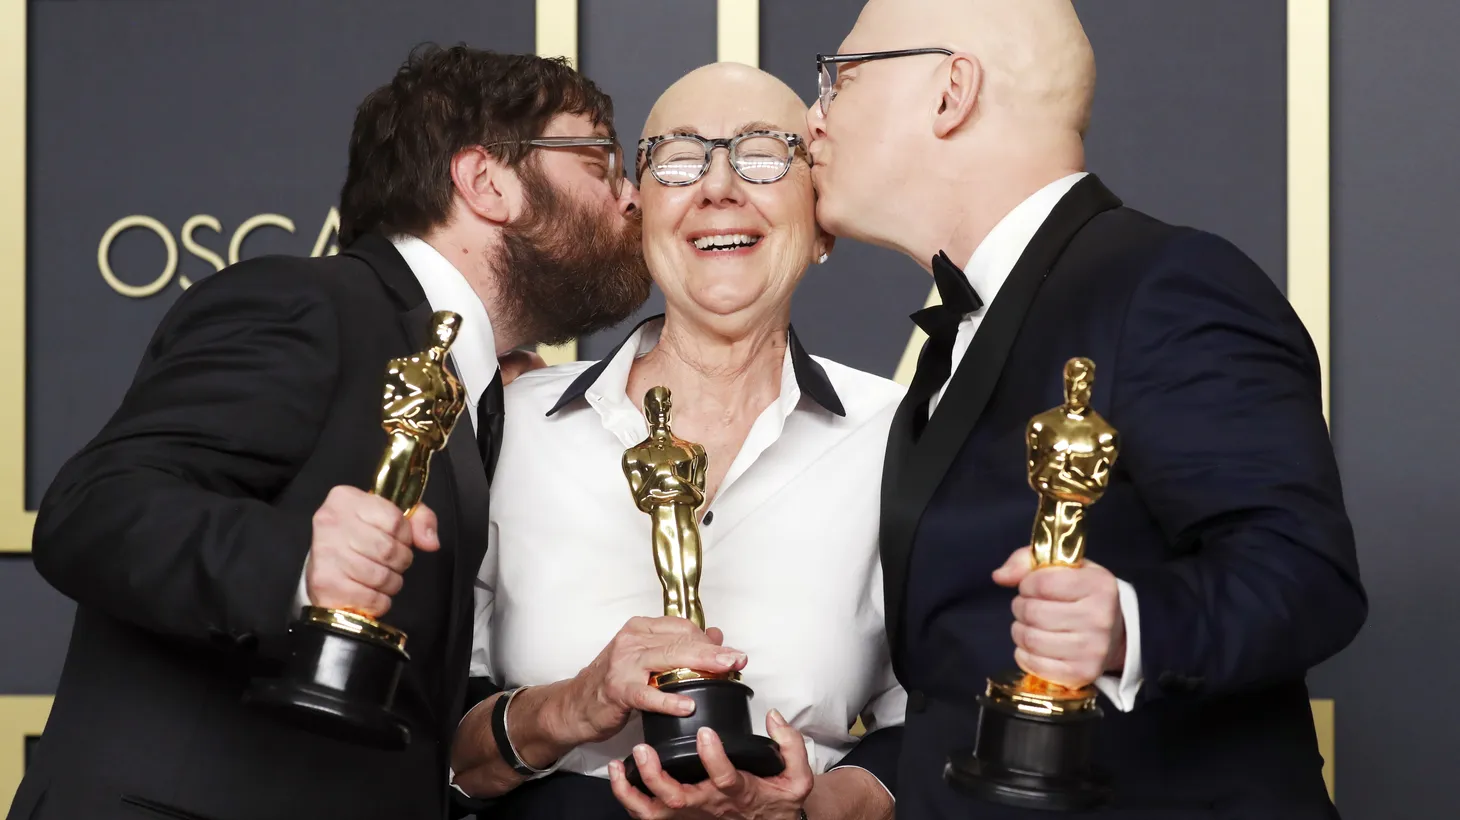 Steven Bognar, Julia Reichert, and Jeff Reichert pose with the Oscar for Best Documentary Feature for "American Factory" during the 92nd Academy Awards in Hollywood, Los Angeles, California, U.S., February 9, 2020.